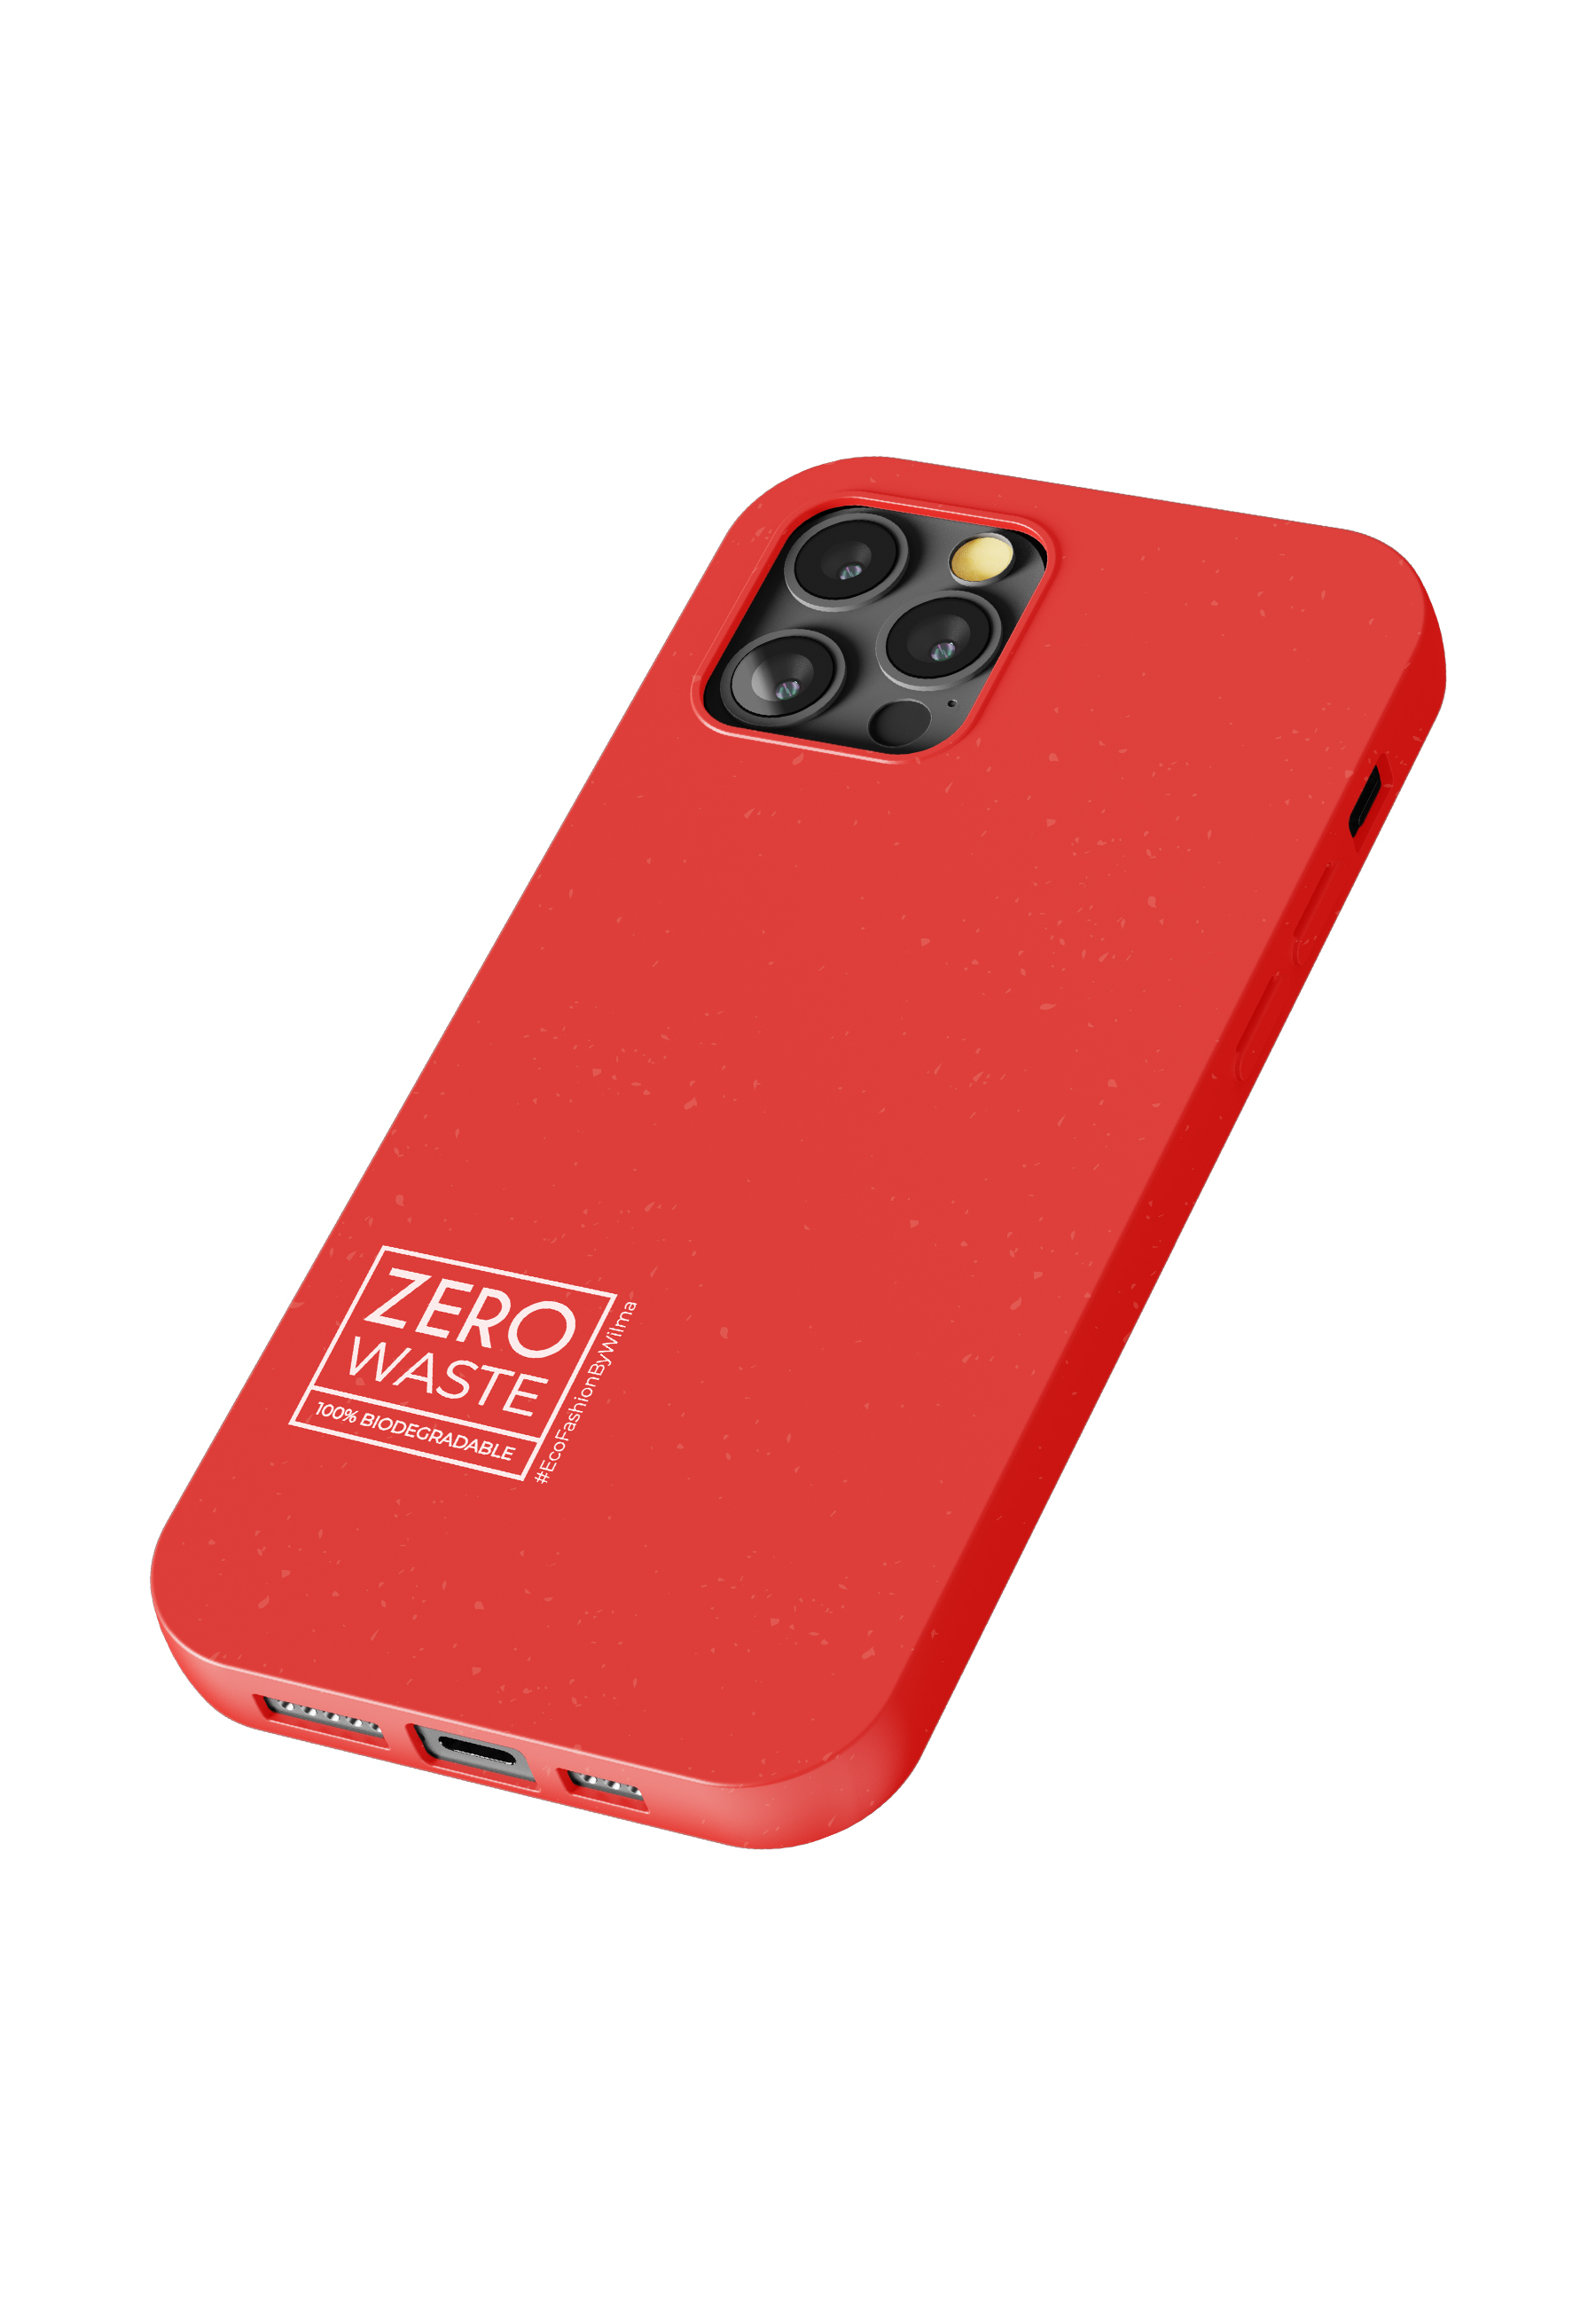 red WILMA ECO BY Pro Max, Apple, P12PM, Backcover, FASHION iPhone 12